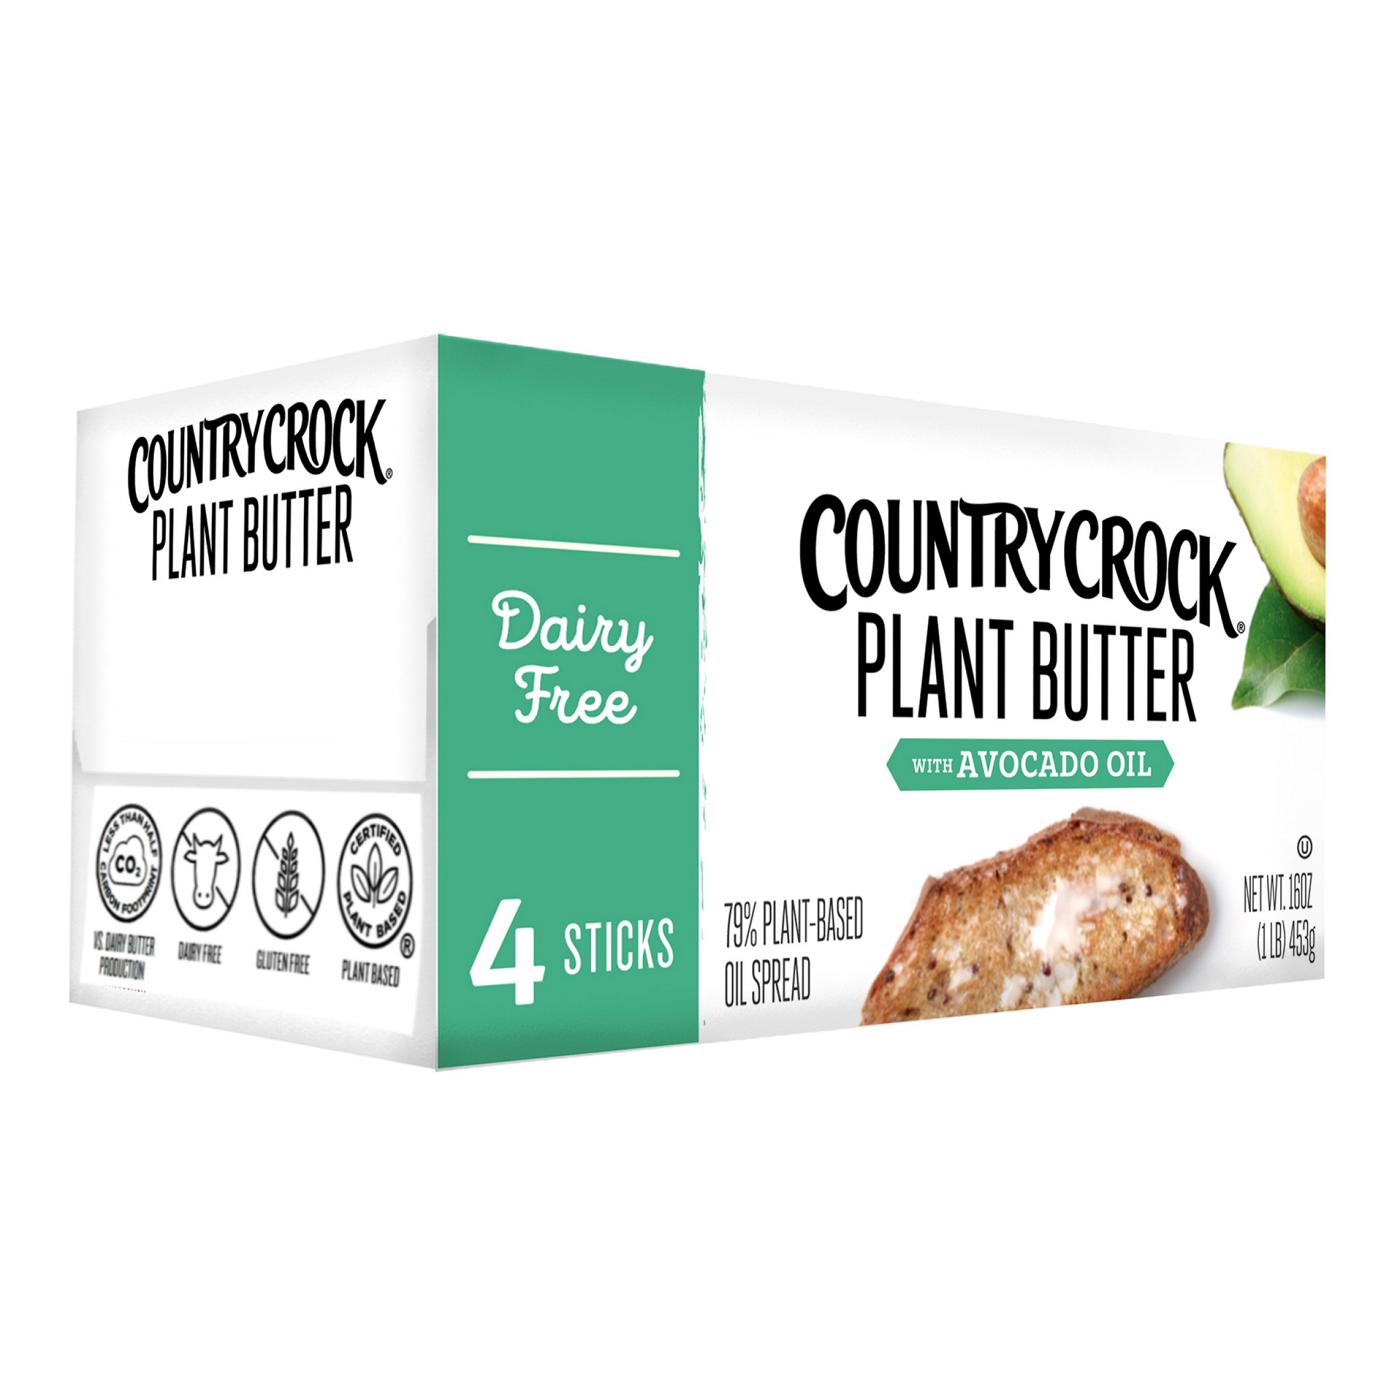 Country Crock Dairy Free Plant Butter with Avocado Oil Sticks; image 4 of 10